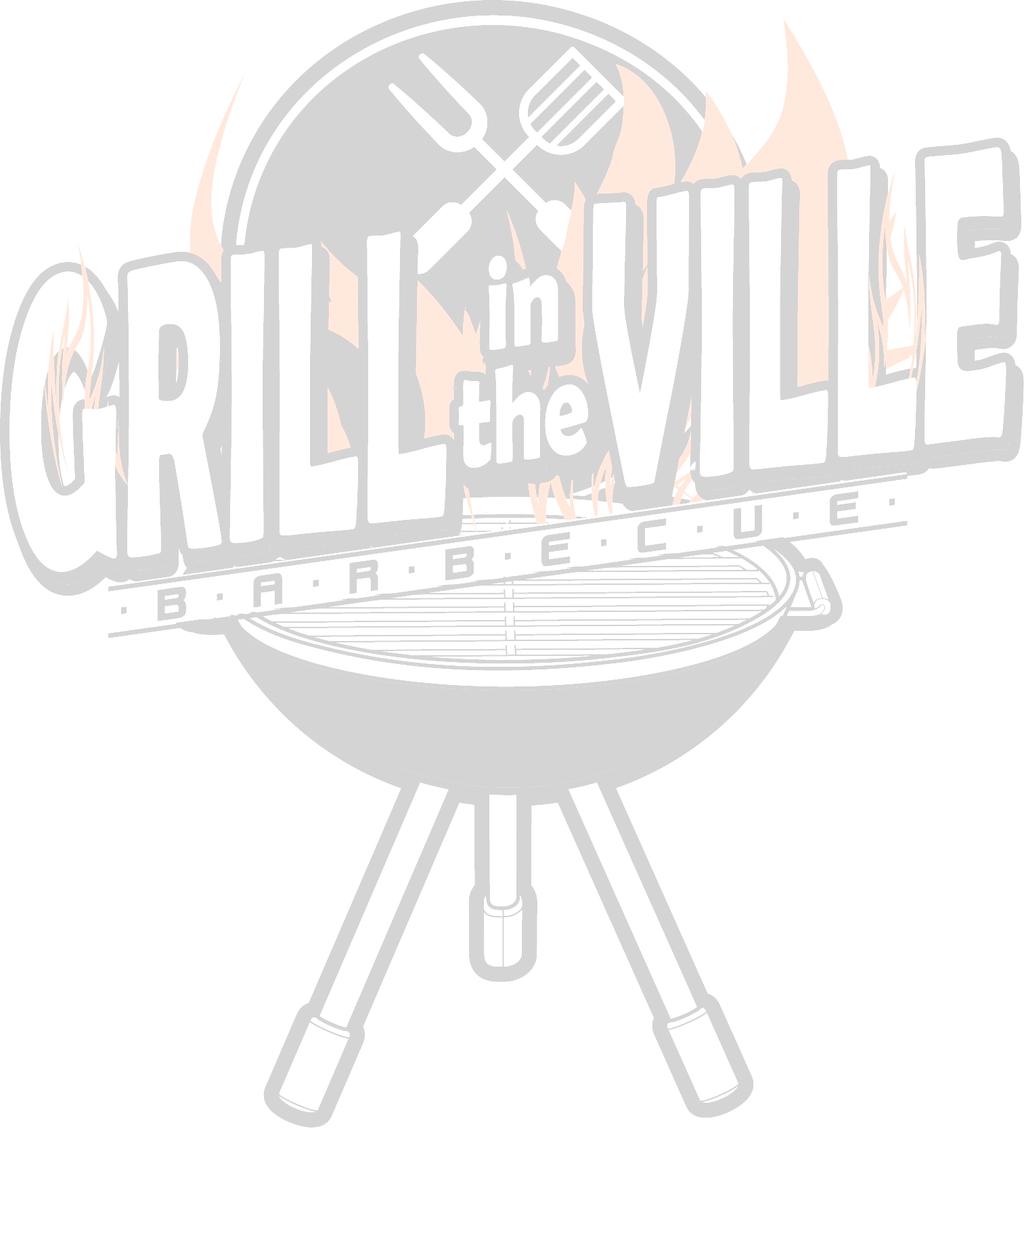 Grill in the Ville BBQ Competition September 29 30, 2017 Team Application Official Team Name: Chief Cook: Contact Person: Phone Number: Email: Mailing Address: City/State/Zip: Payment for entry must